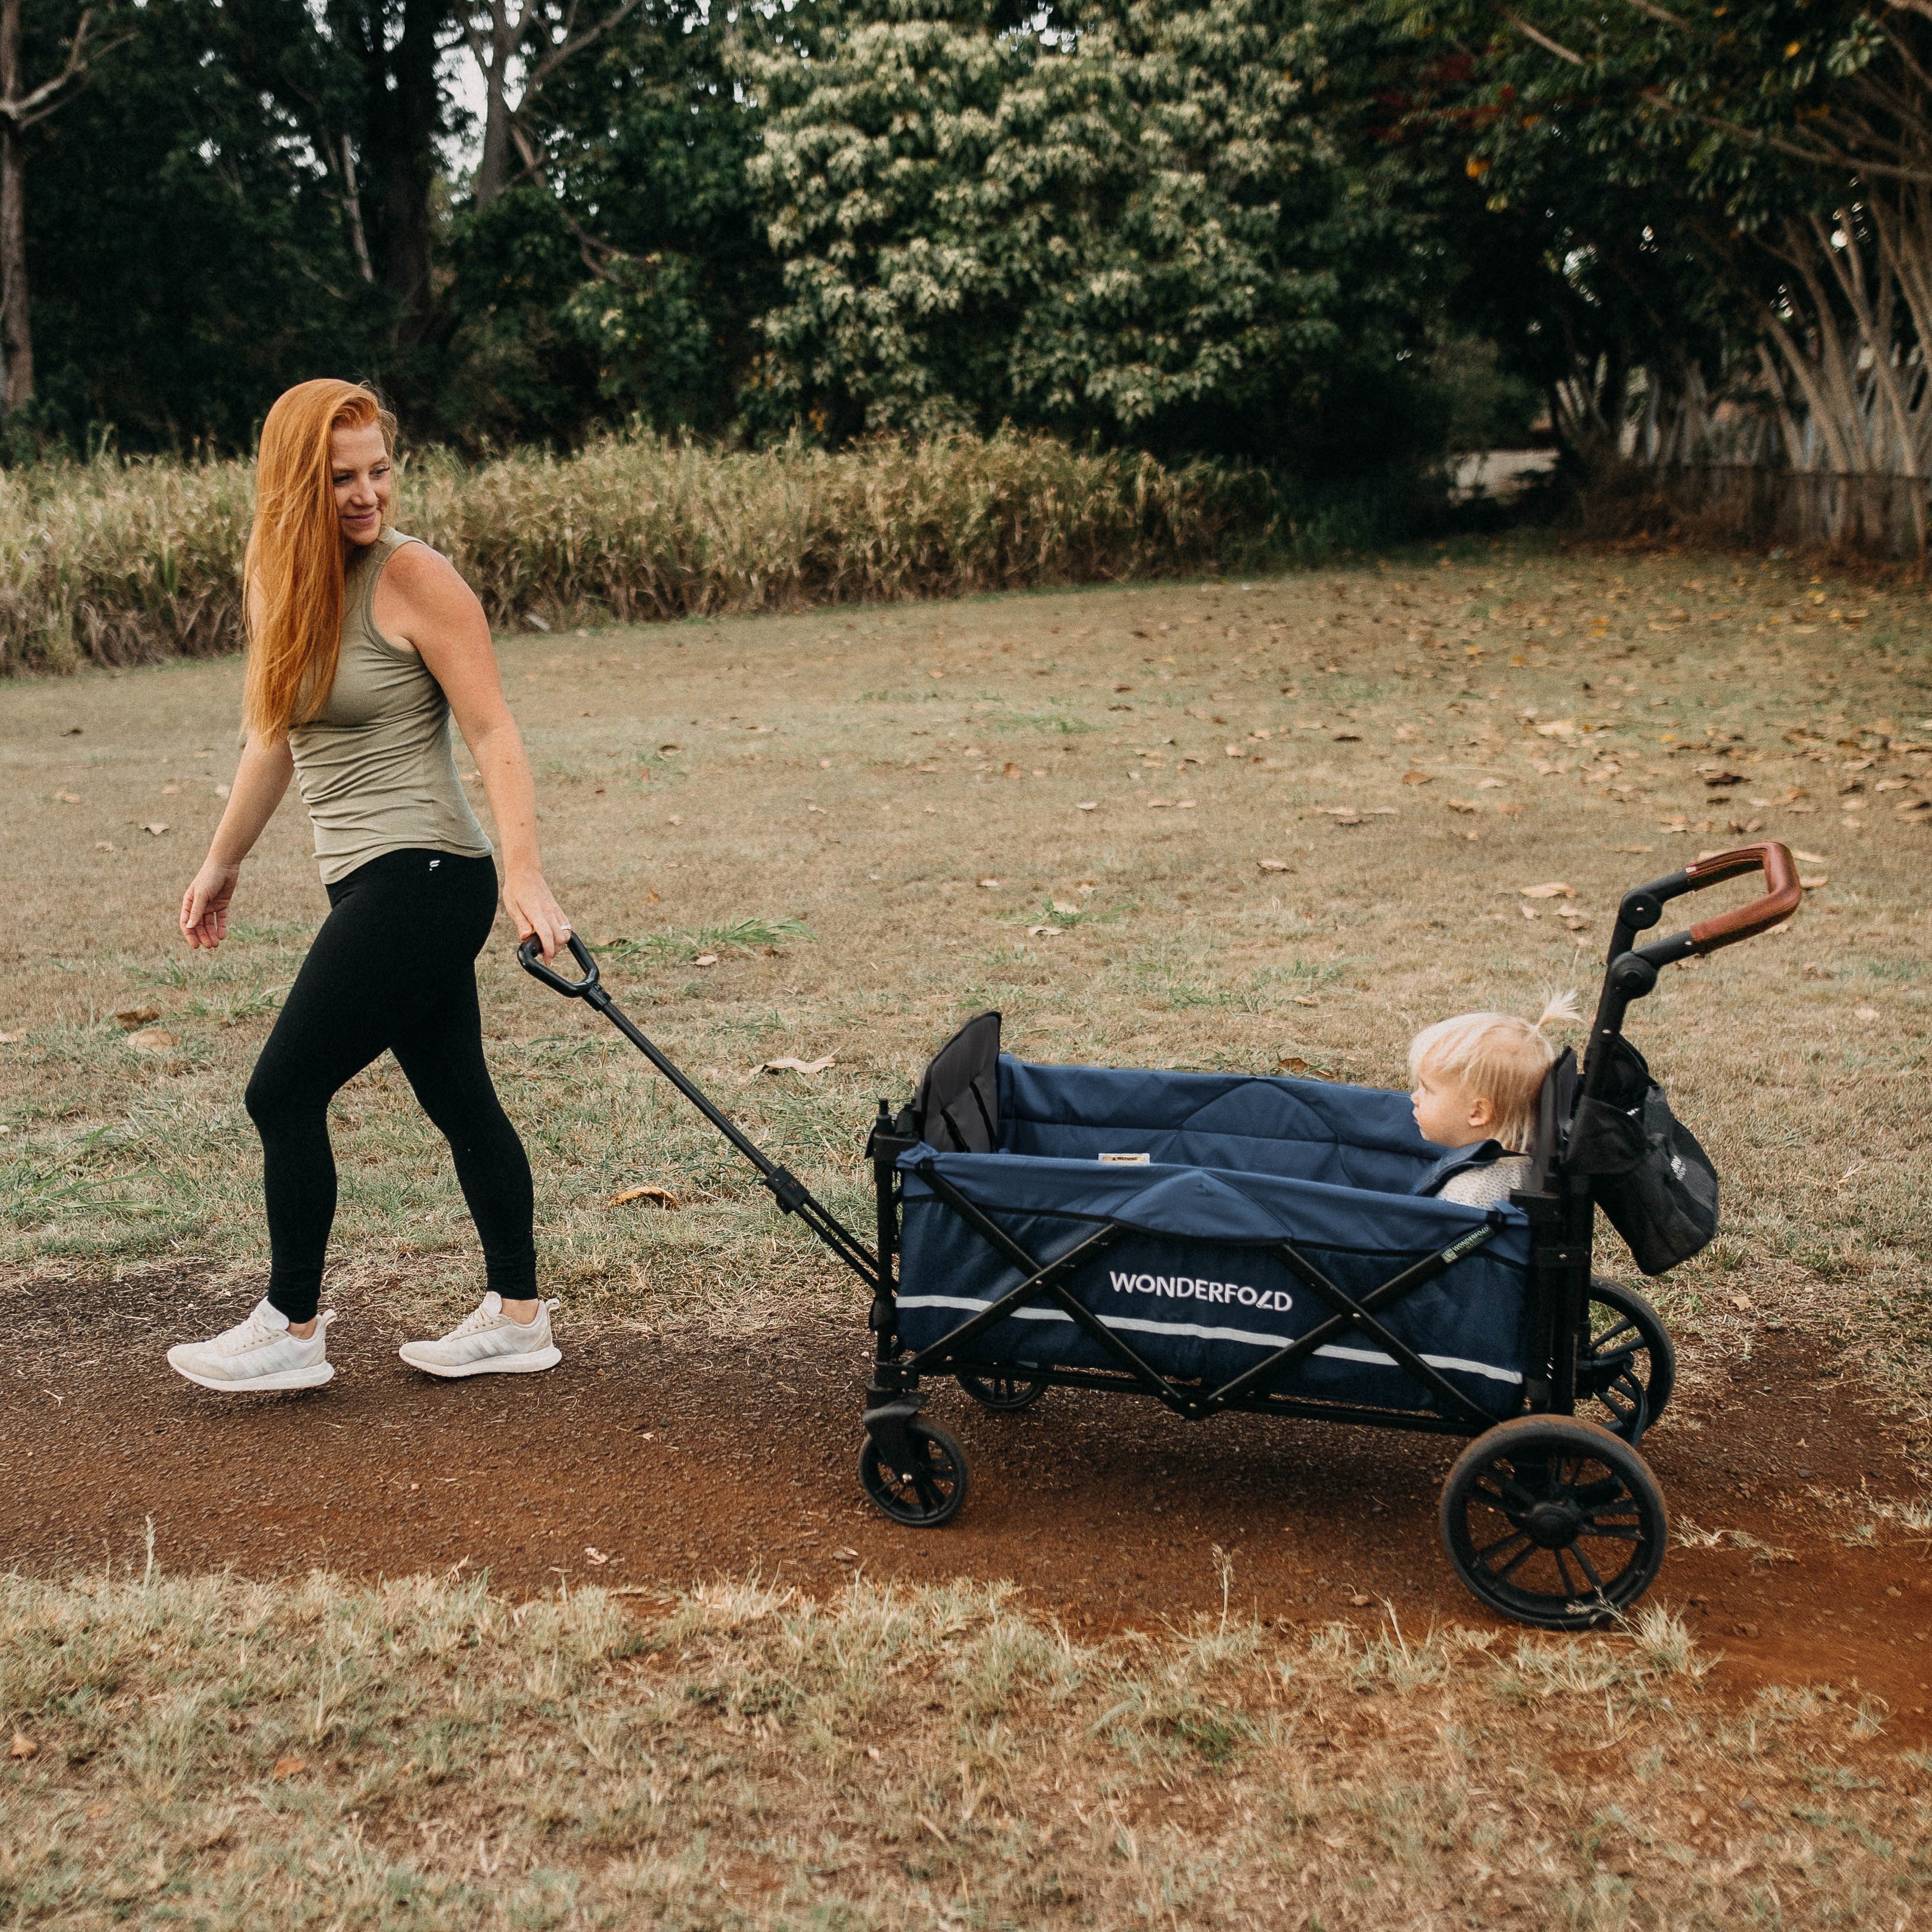 X2 Push + Pull Double Stroller Wagon (2 Seater)